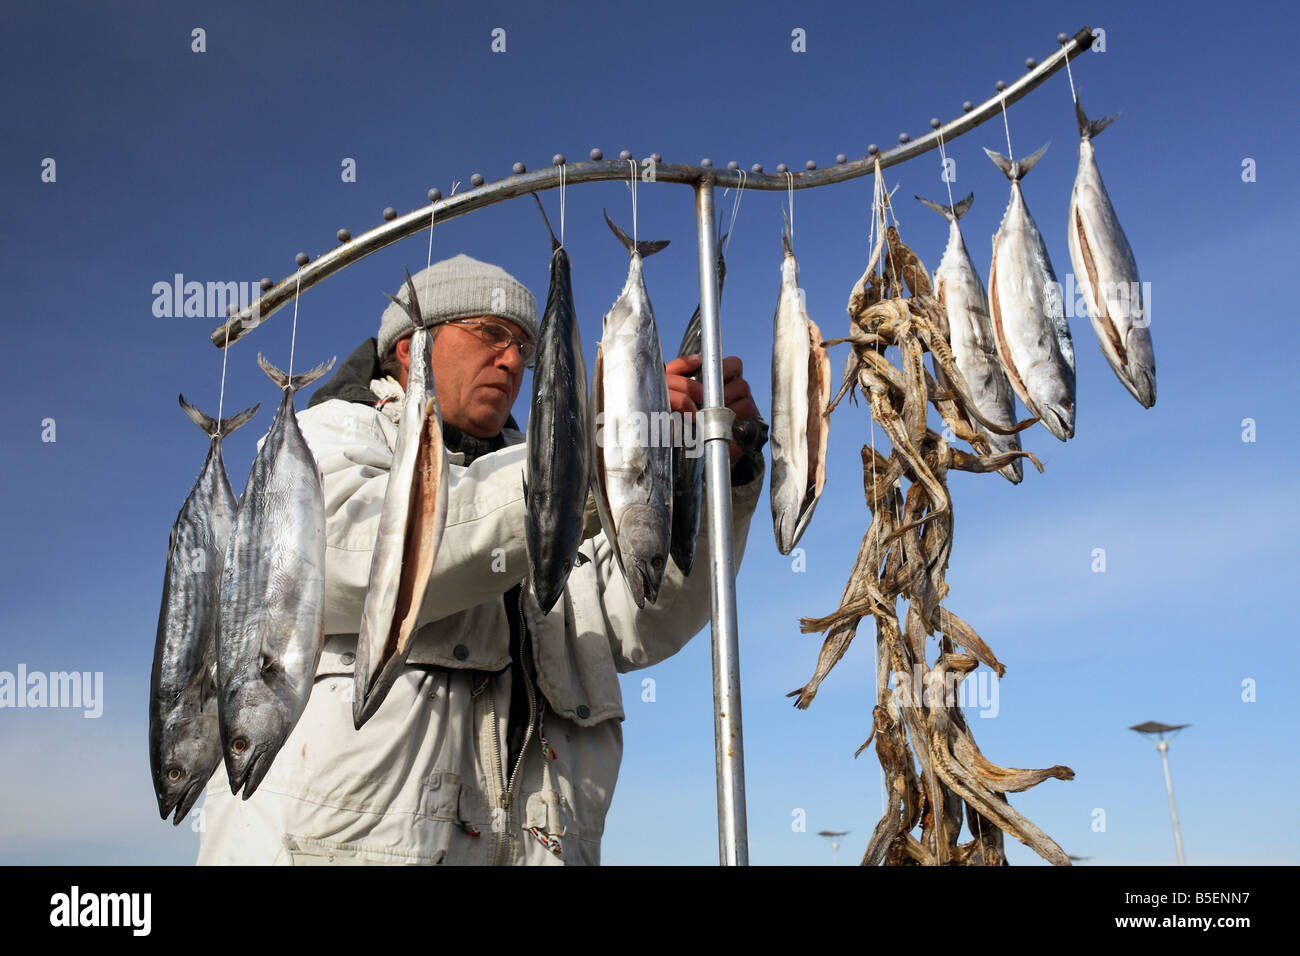 A fisherman hanging out fish to dry Stock Photo